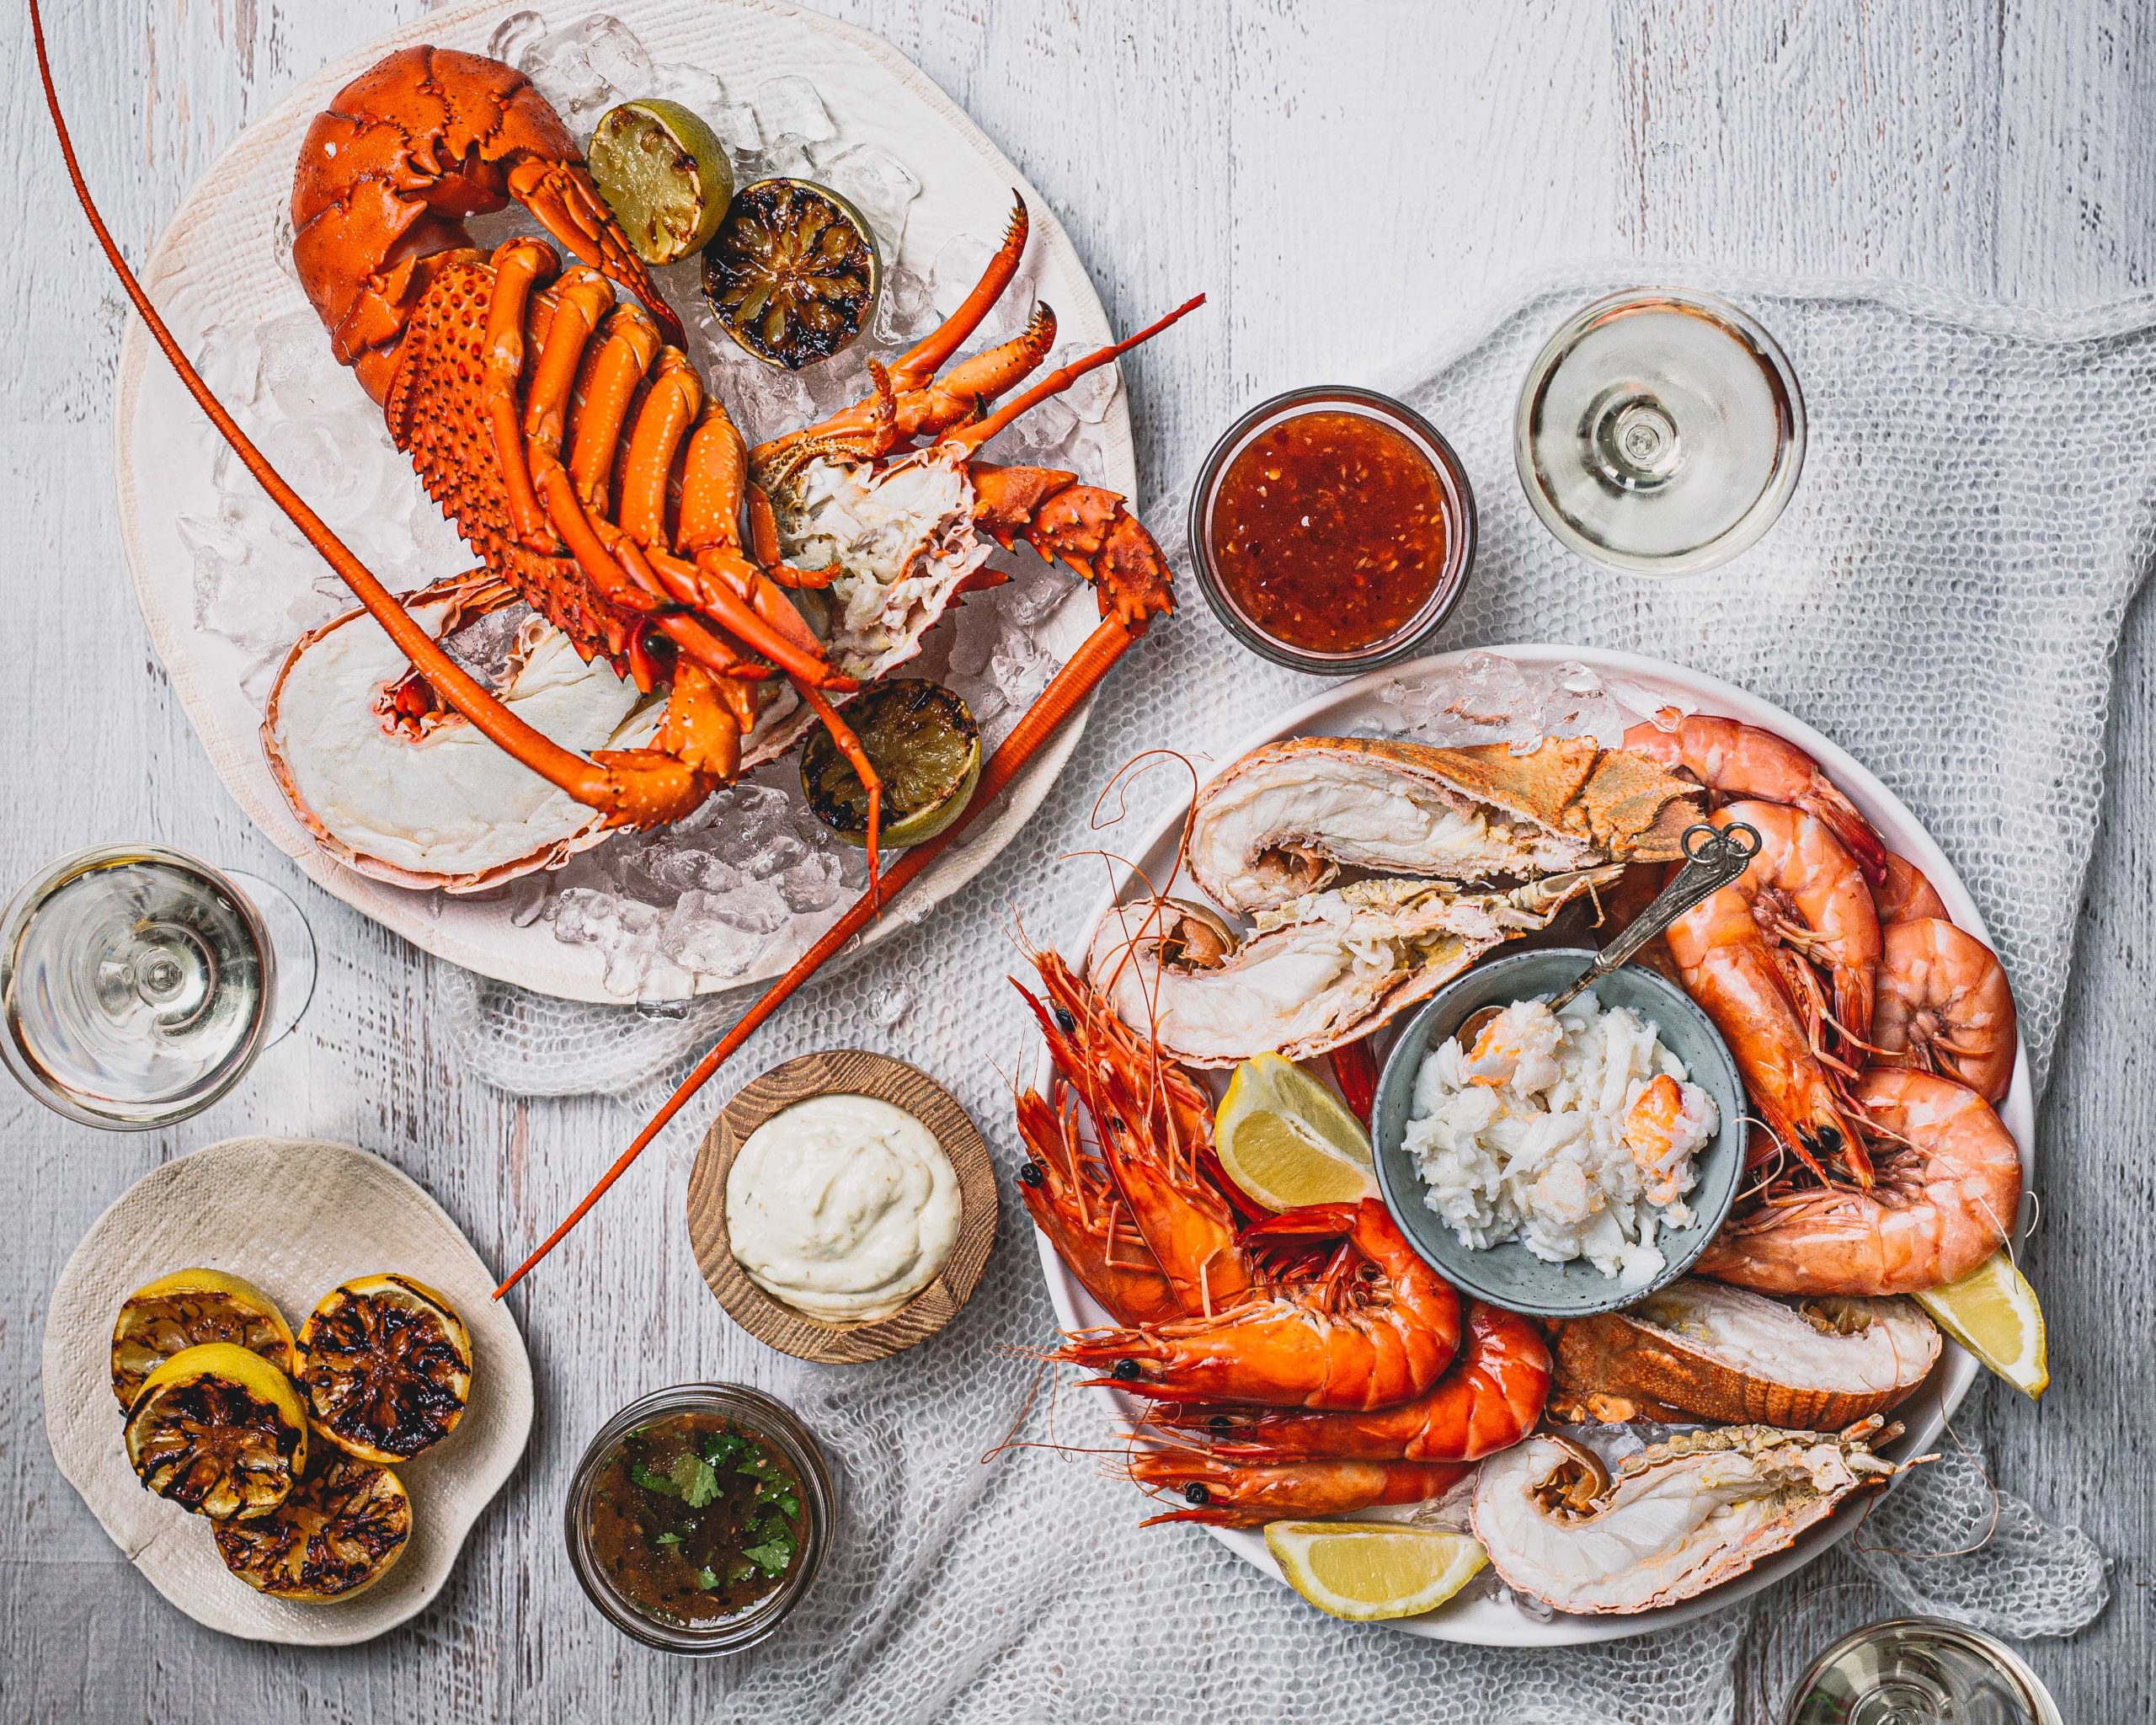 ‘Celebrate with Australian seafood’: Australian seafood availability and price guide for Christmas 2021